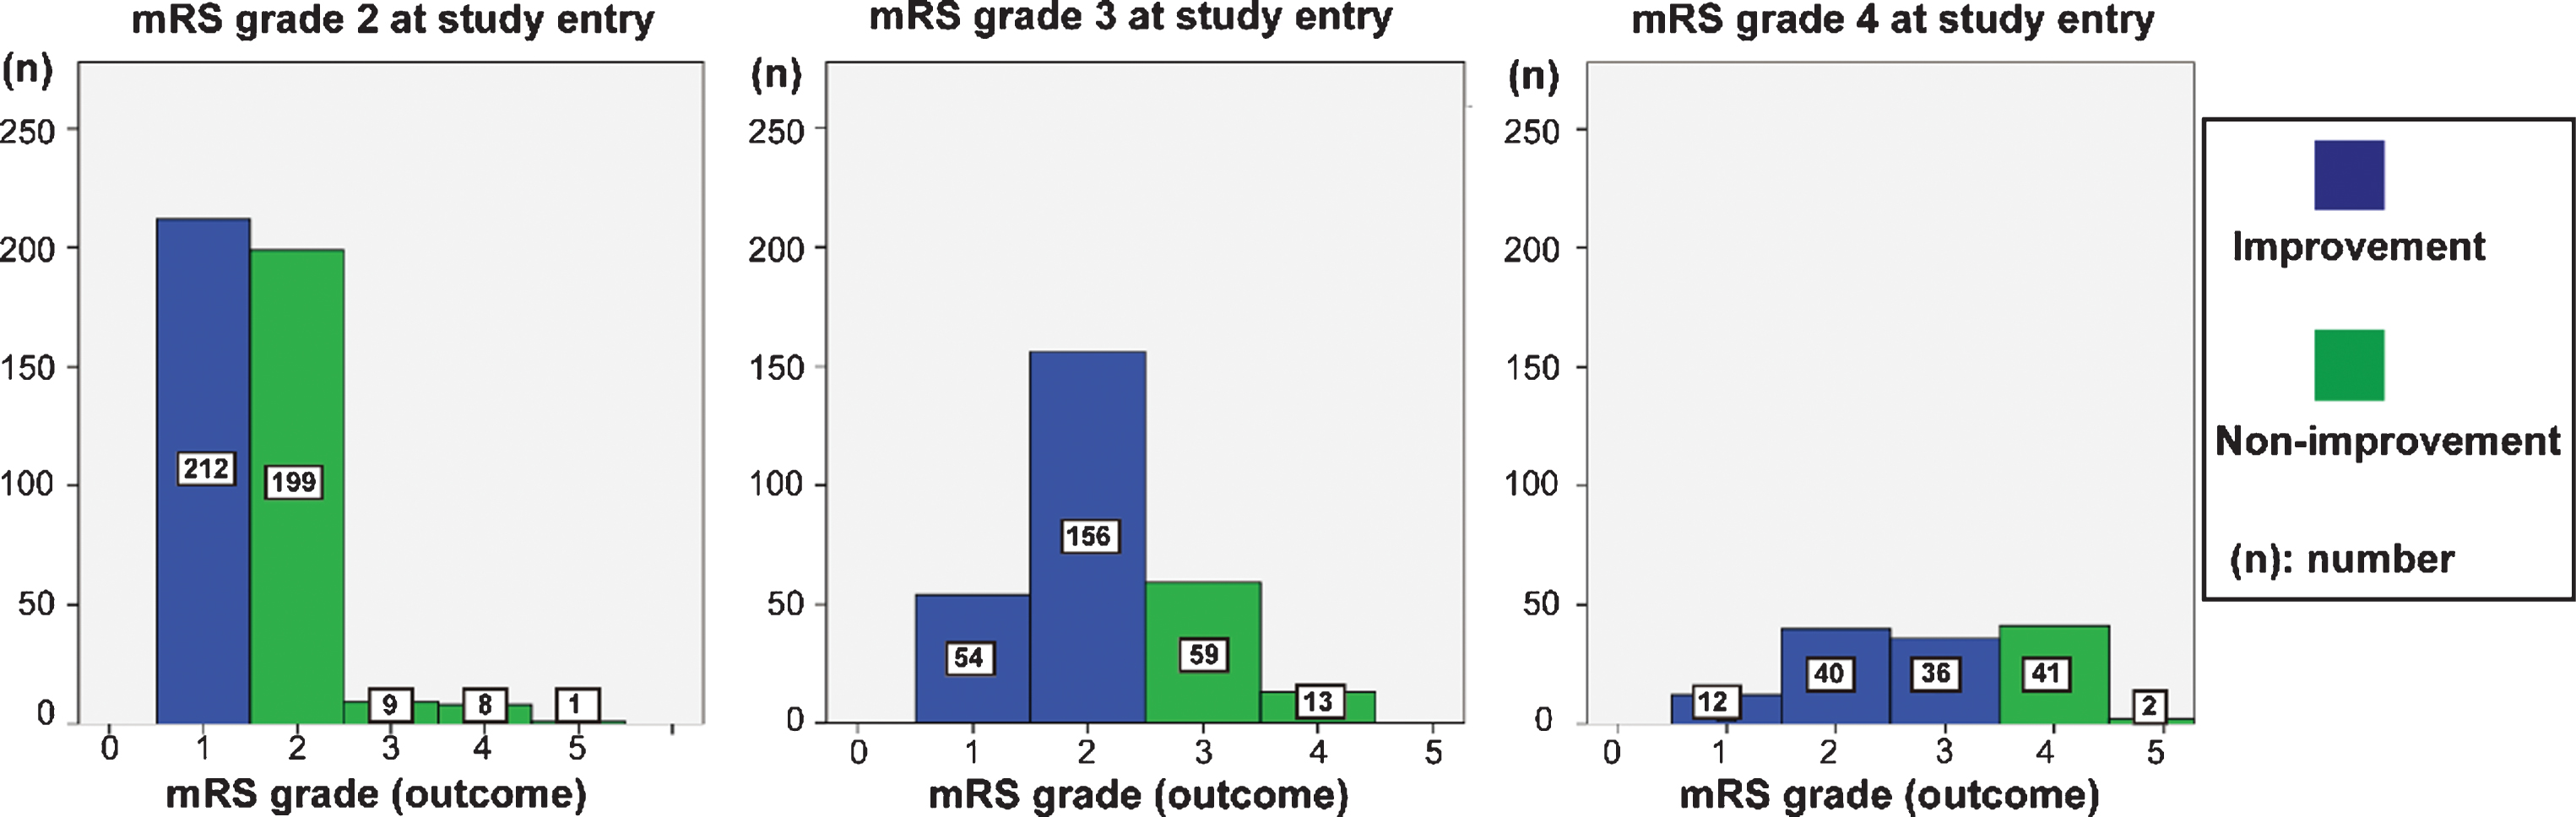 Outcome of each mRS grade at study entry. In mRS grade 2 at study entry, 212 showed an improved mRS grade, 199 showed maintenance of mRS grade, and 18 showed a worsening of mRS grade after CSF shunt. In patients with mRS grade 3 at study entry, 210 showed an improved mRS grade, 59 showed maintenance of mRS grade, and 13 showed a worsening of mRS grade after CSF shunt. In patients with mRS grade 4 at study entry, 88 showed an improved mRS grade, 41 showed maintenance of mRS grade, and 2 showed worsening of mRS grade.